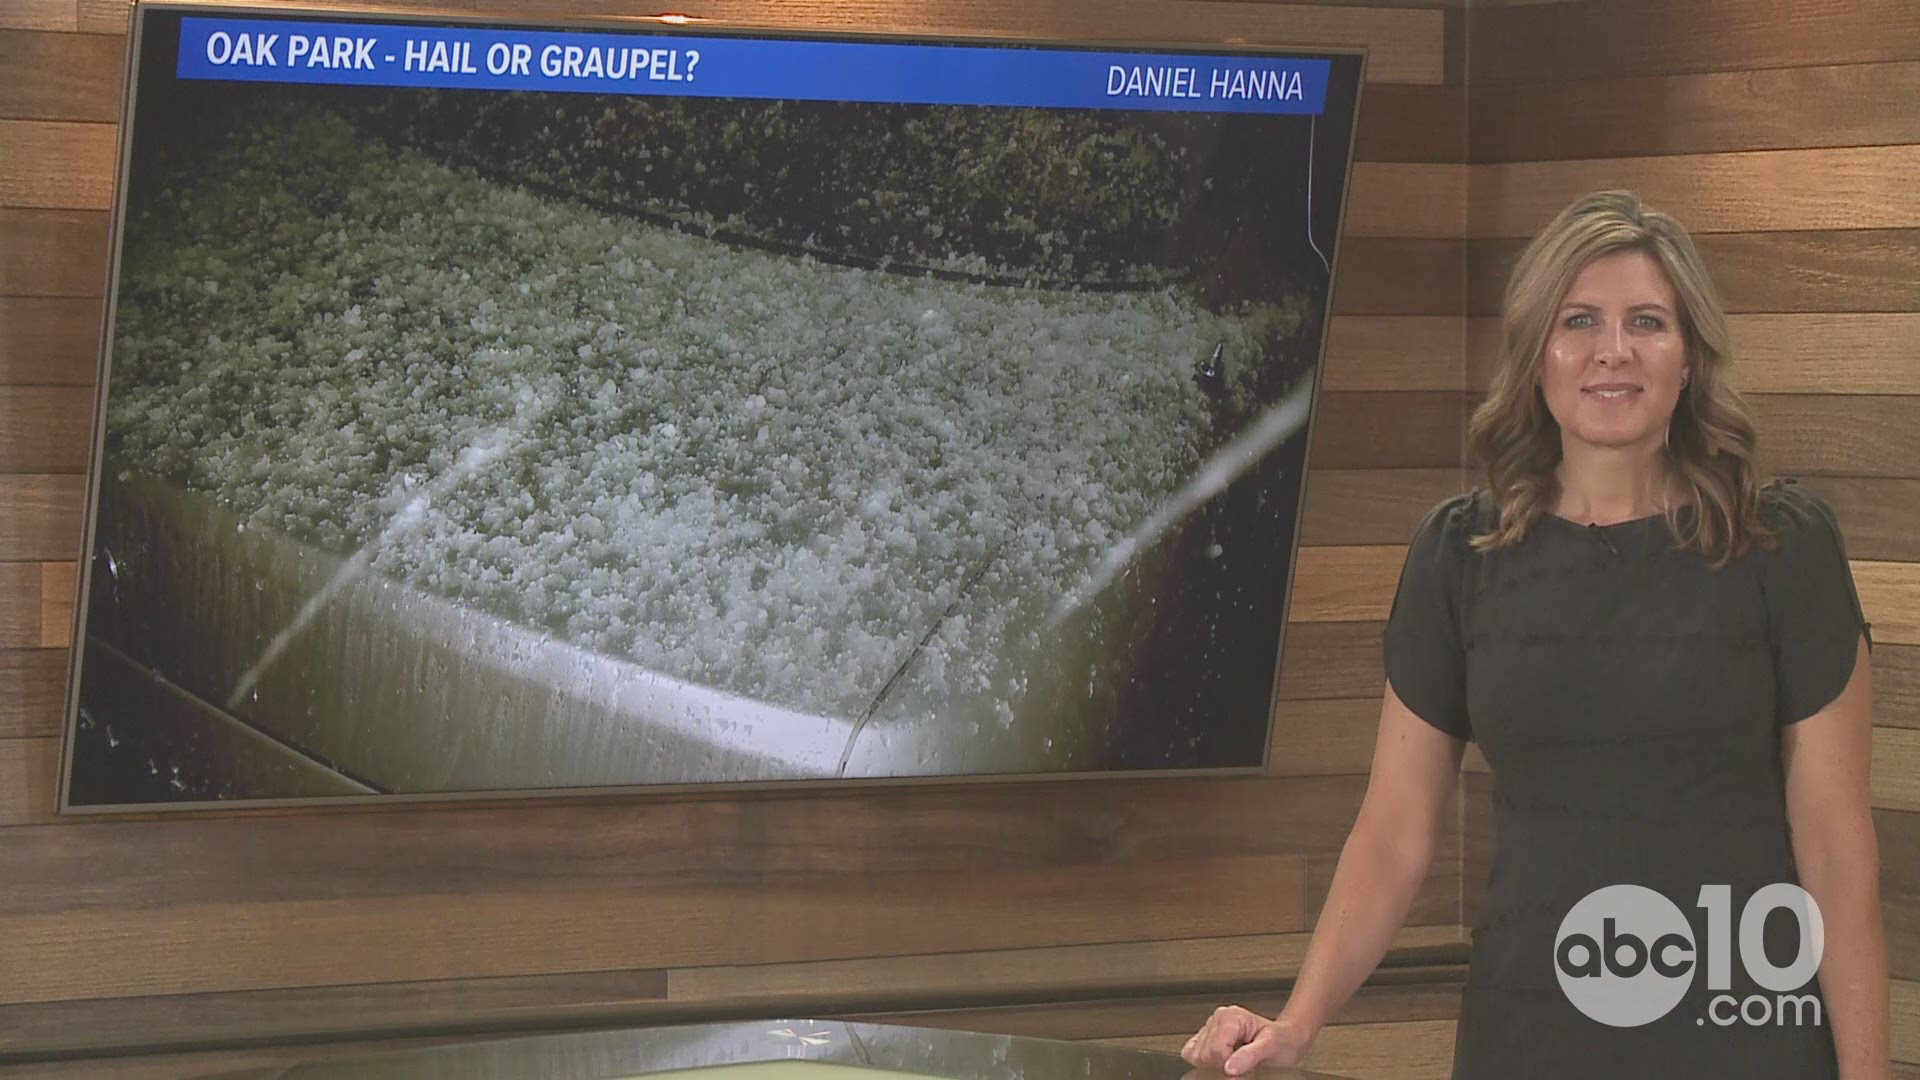 This Geek Lab is inspired by an Oak Park viewer photo and question about what really fell from the sky. Hail or graupel?